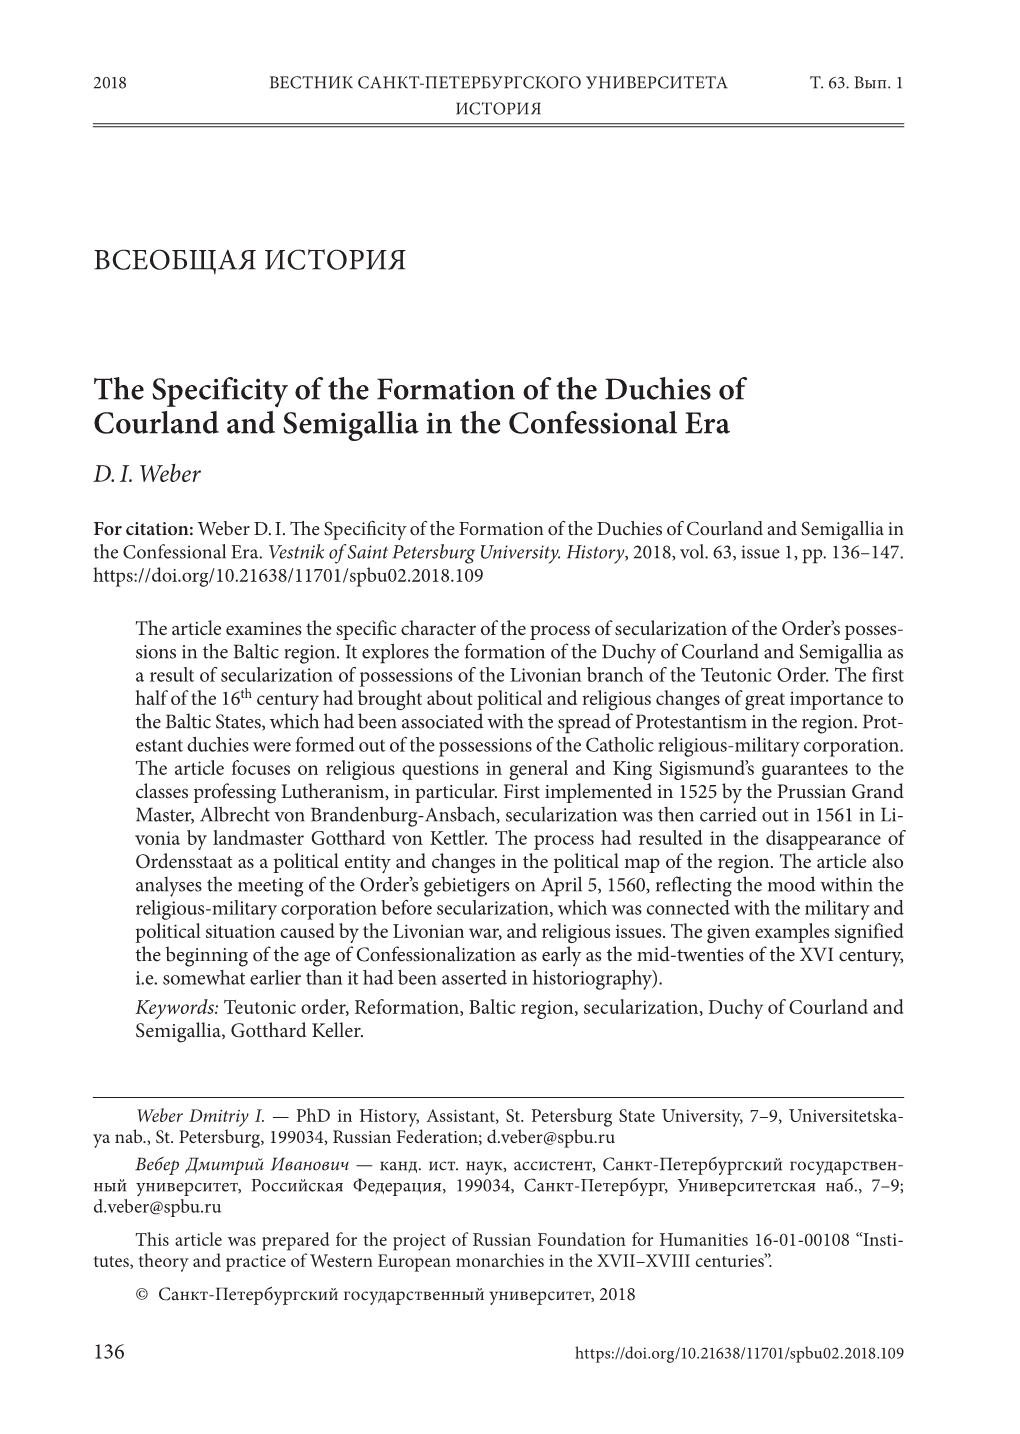 The Specificity of the Formation of the Duchies of Courland and Semigallia in the Confessional Era D